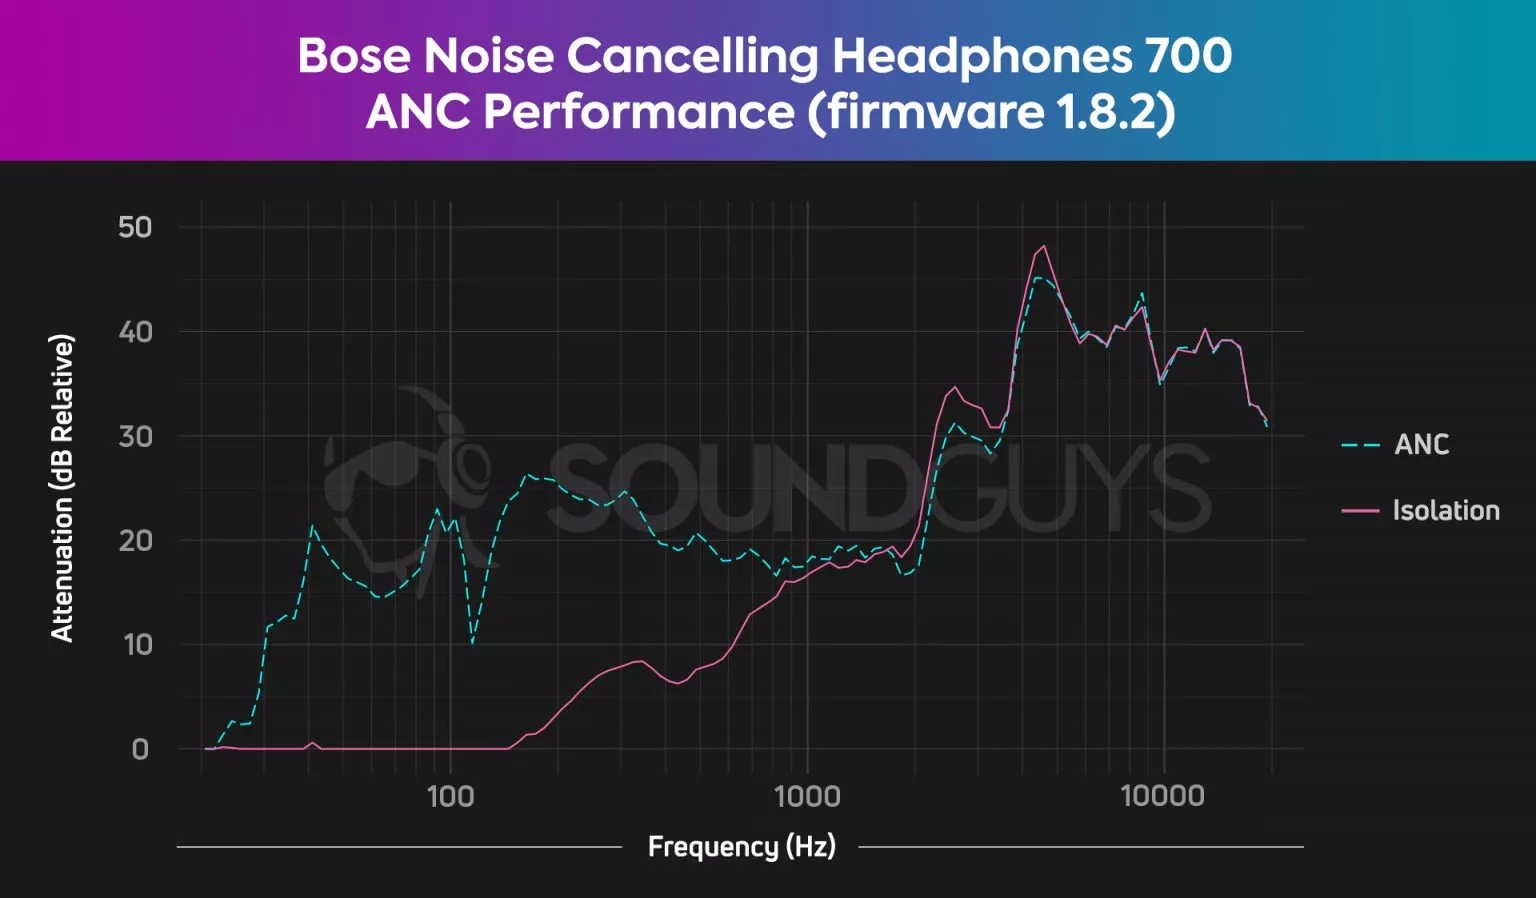 Diagram showing the excellent active noise canceling performance of the Bose Noise Canceling 700 headphones.